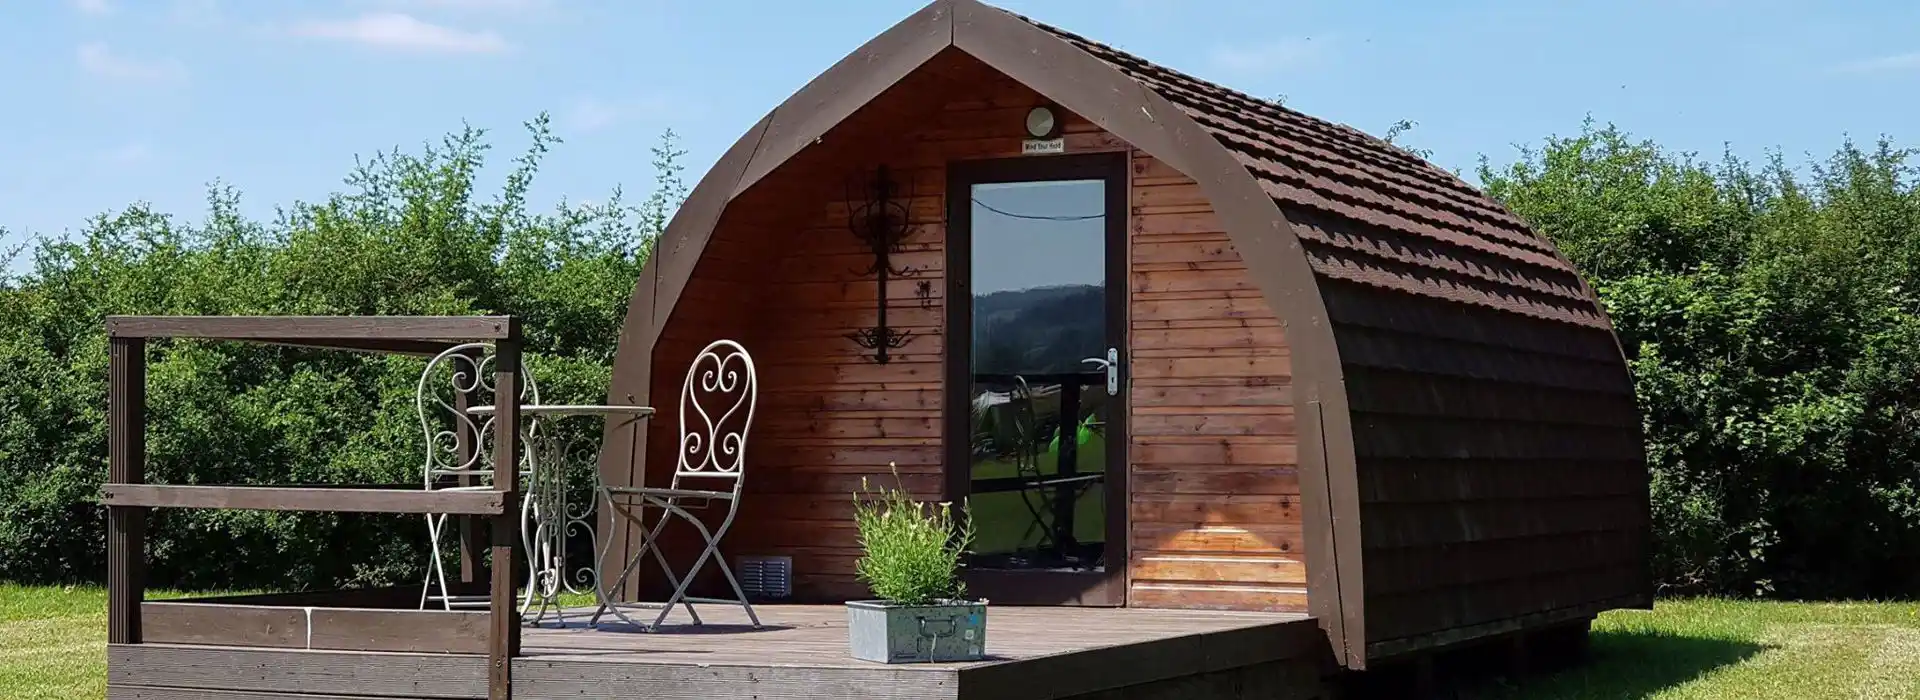 Frodsham camping and glamping pods